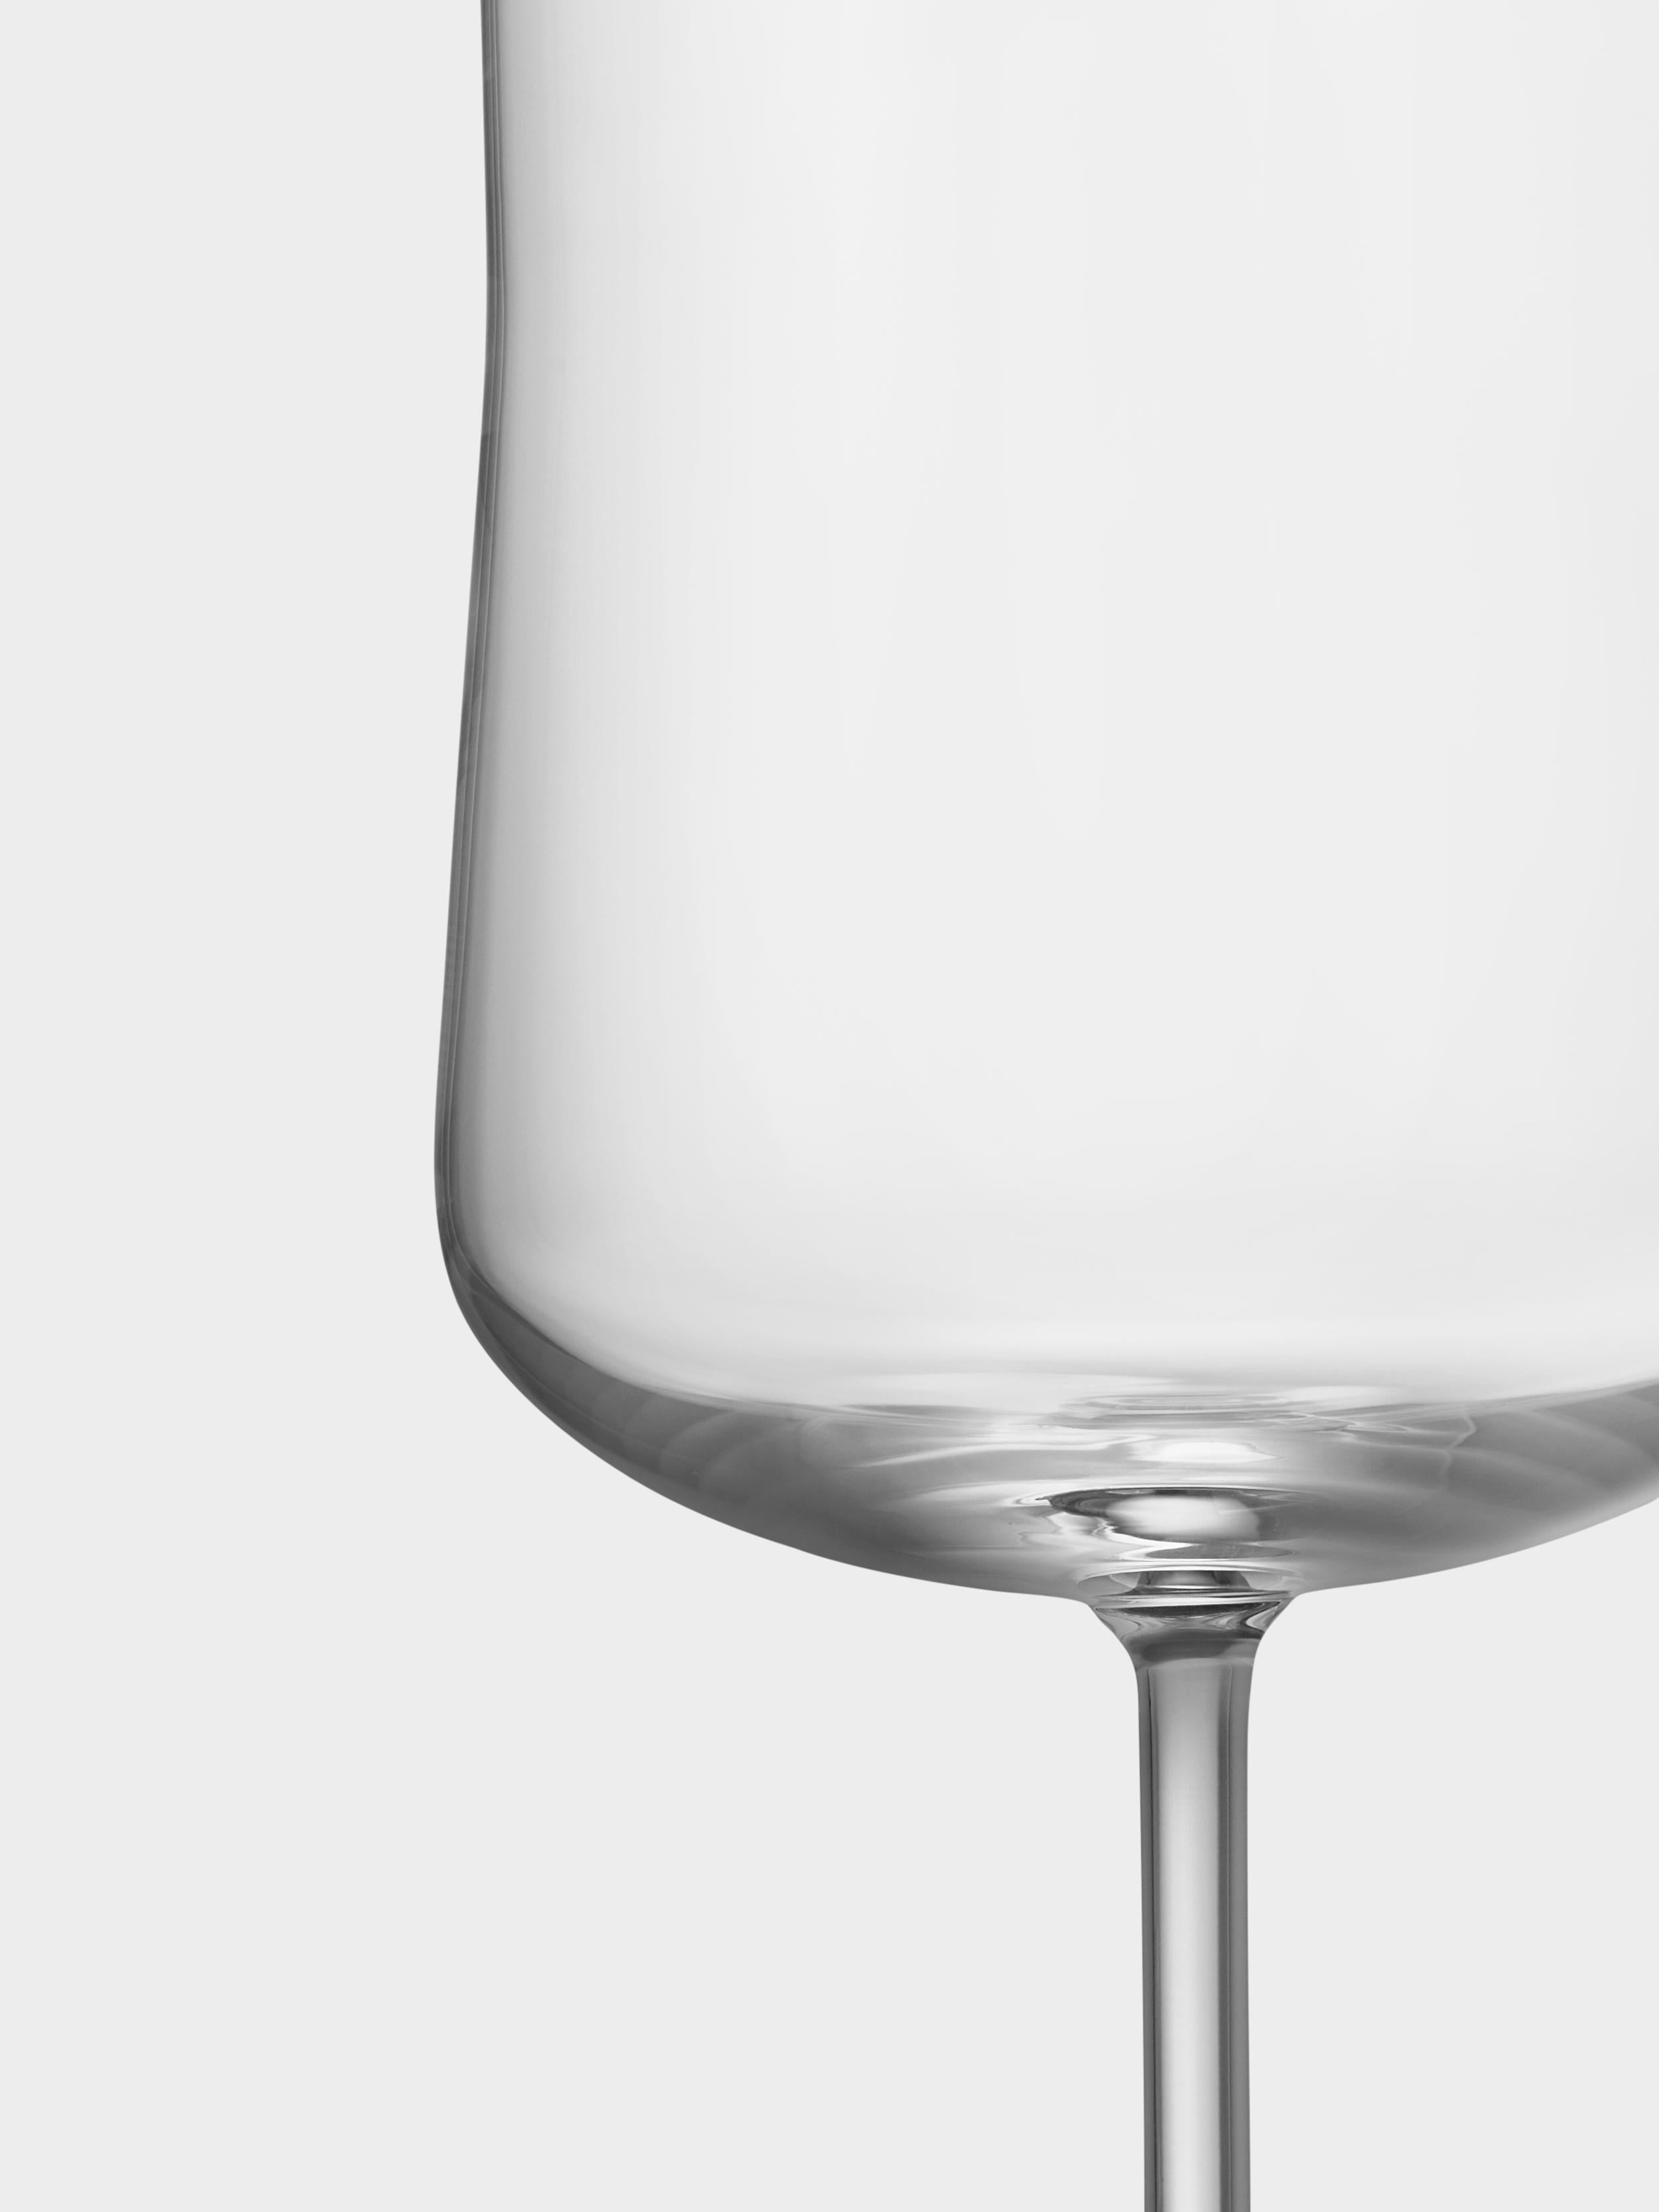 Informal from Orrefors has a contemporary Scandinavian design, and the subtle character of the collection makes it ideal for both formal and casual use. The large stem glass holds 14.5 oz and is outstanding for serving wine, beer, water, or juice.